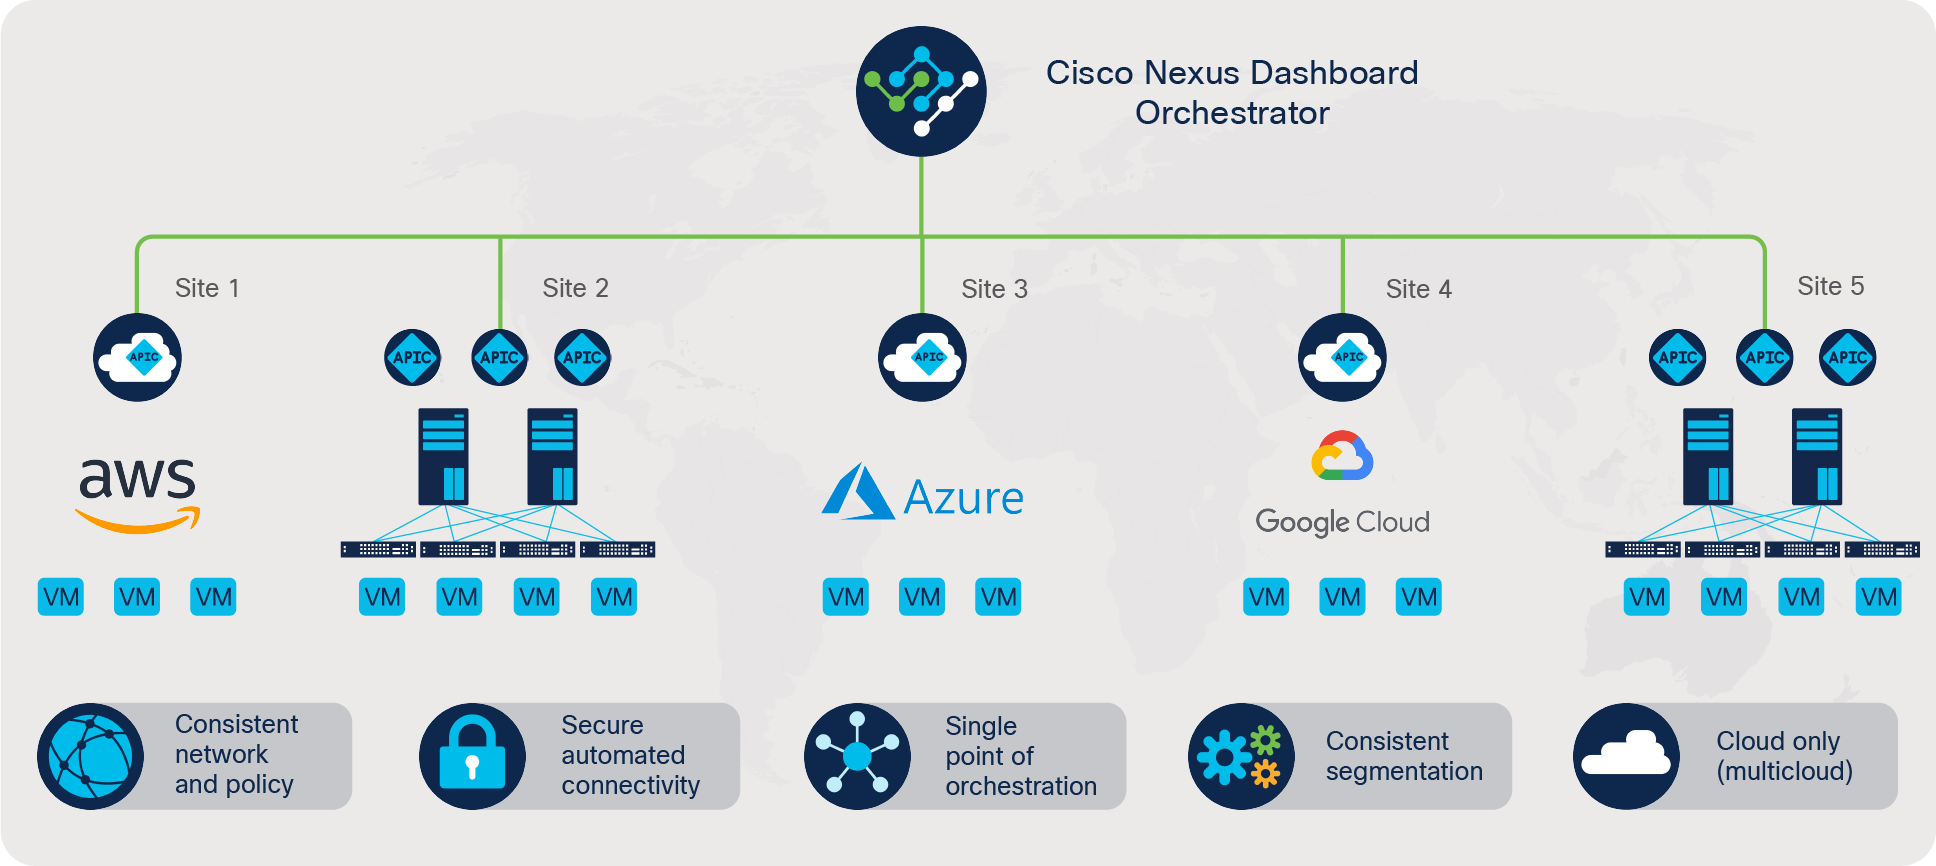 Cisco Nexus Dashboard Orchestrator offers multi-site networking orchestration and policy management from a single pane of glass